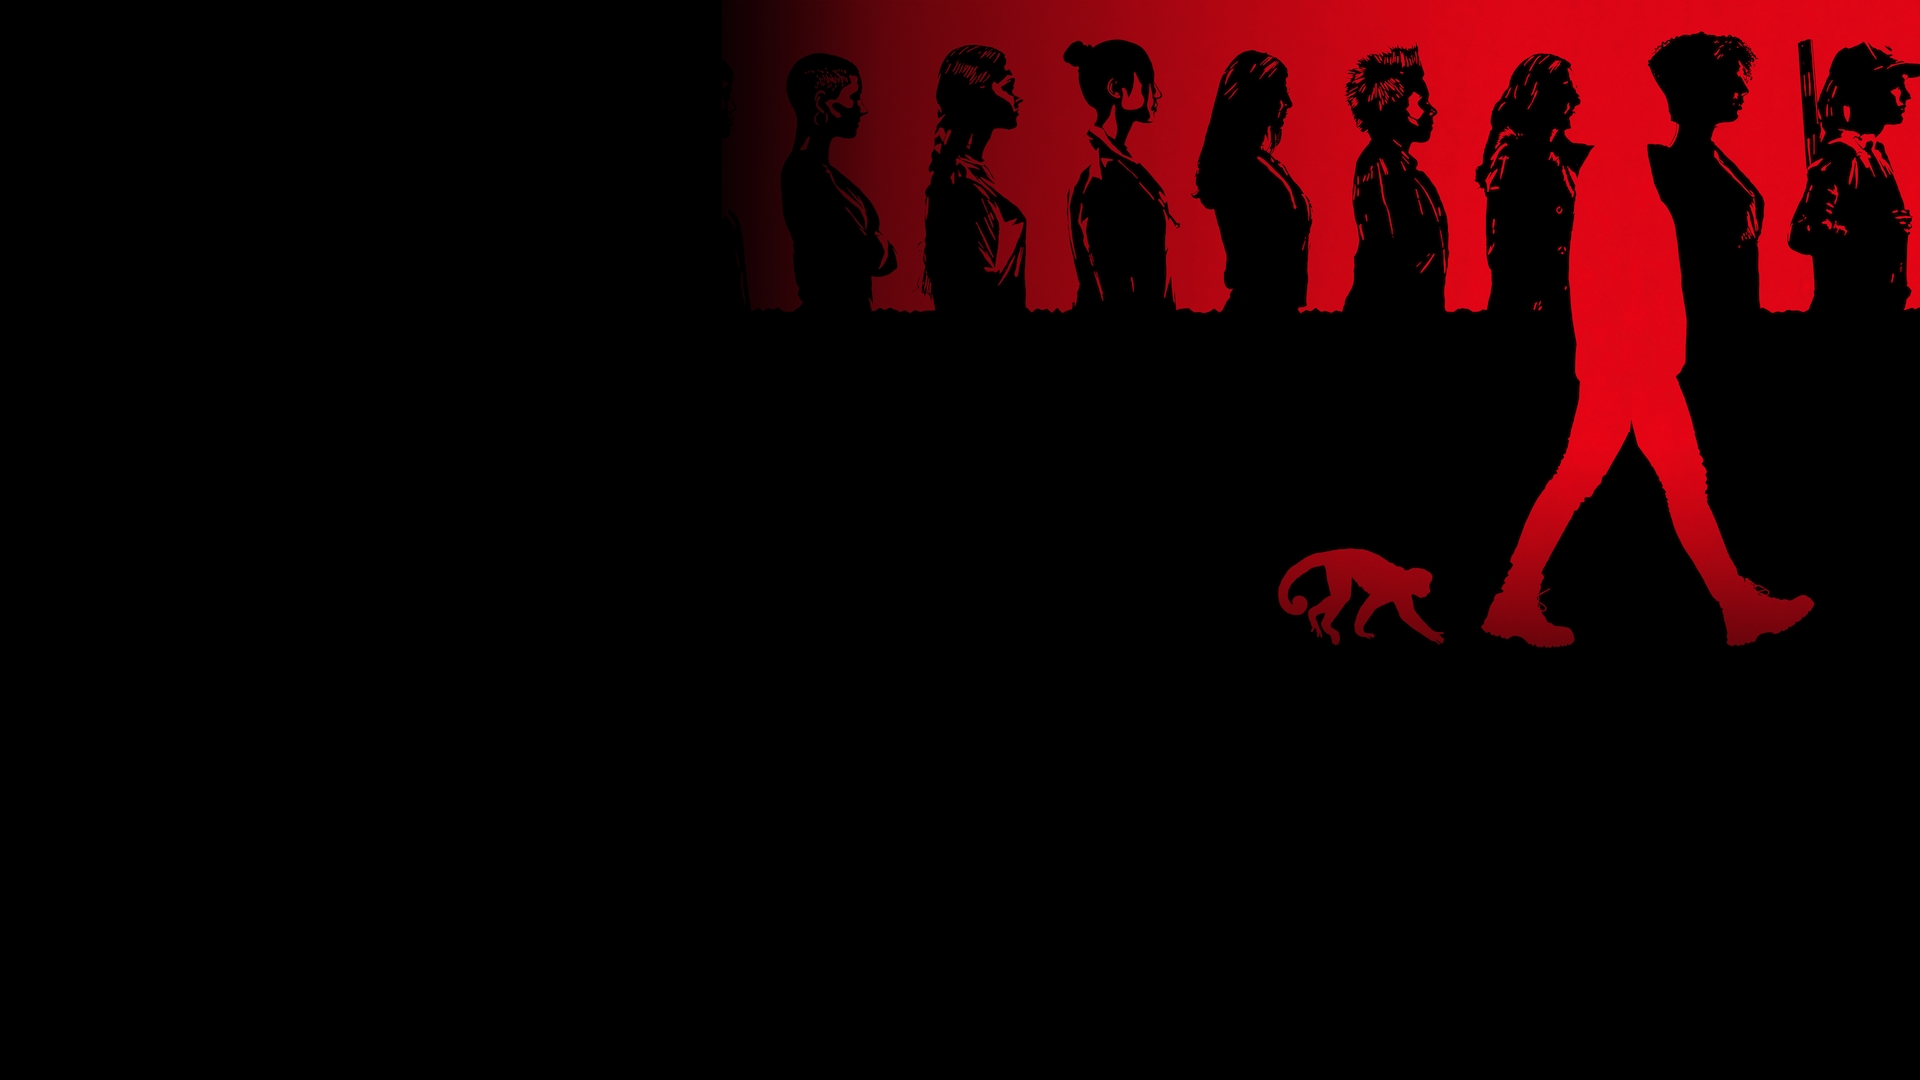 Figures of people and a monkey highlighted in red and army of people in black for FX's Y The Last Man